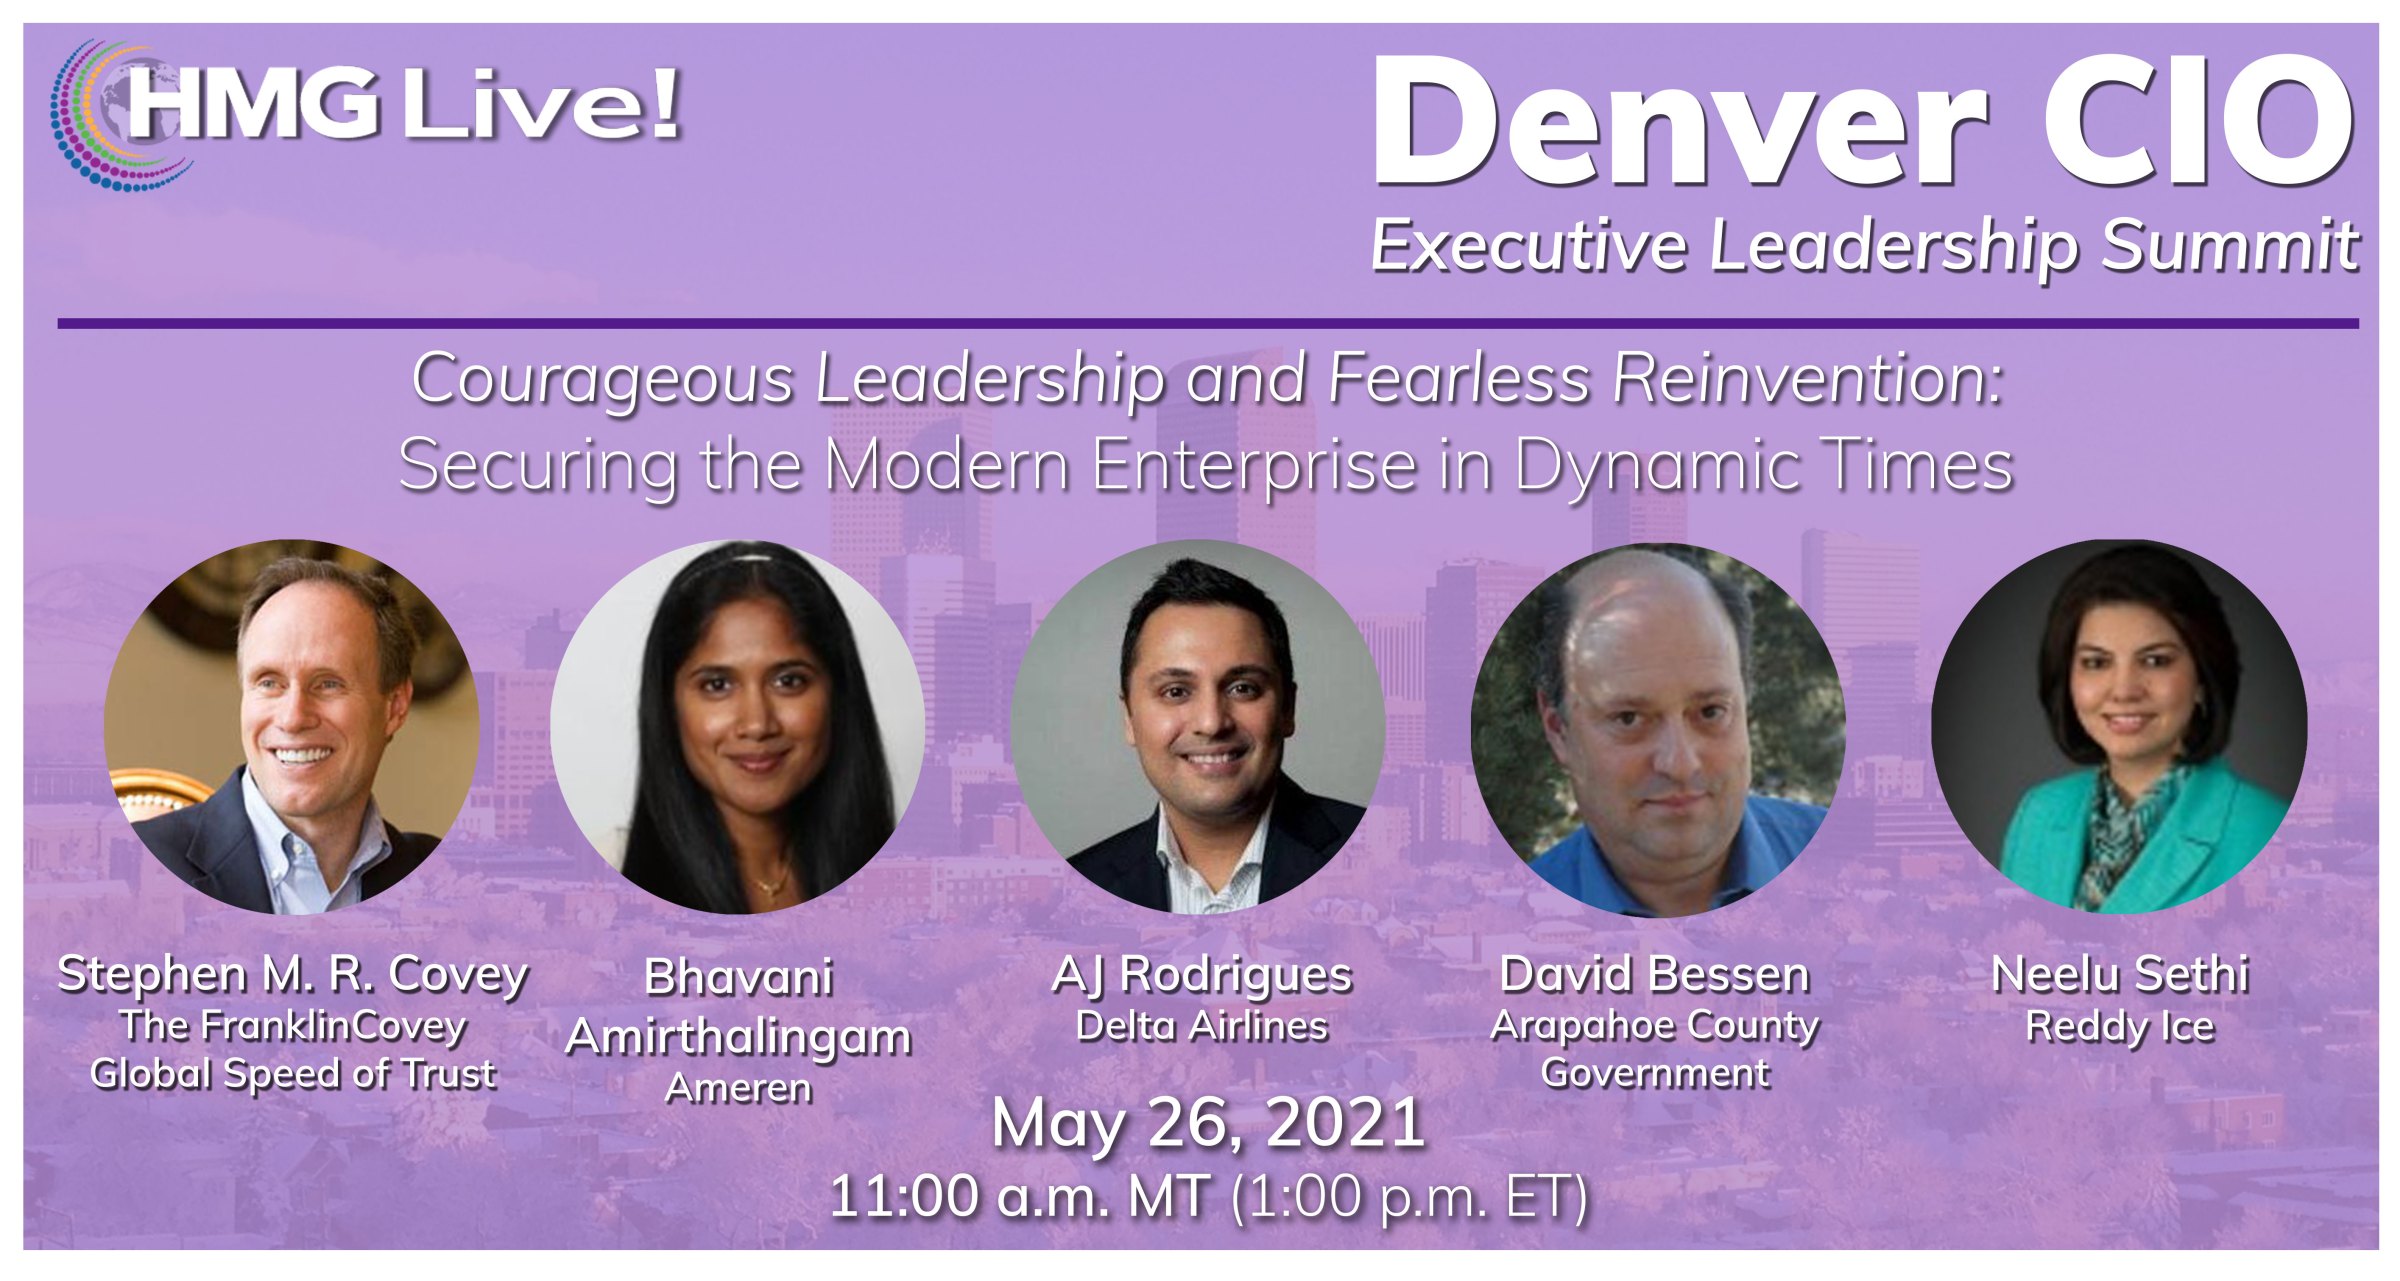 CIO Leadership: Leading Courageously and Authentically in a Time of Uncertainty Will Fuel the Discussion at the 2021 HMG Live! Denver CIO Executive Leadership Summit on May 26